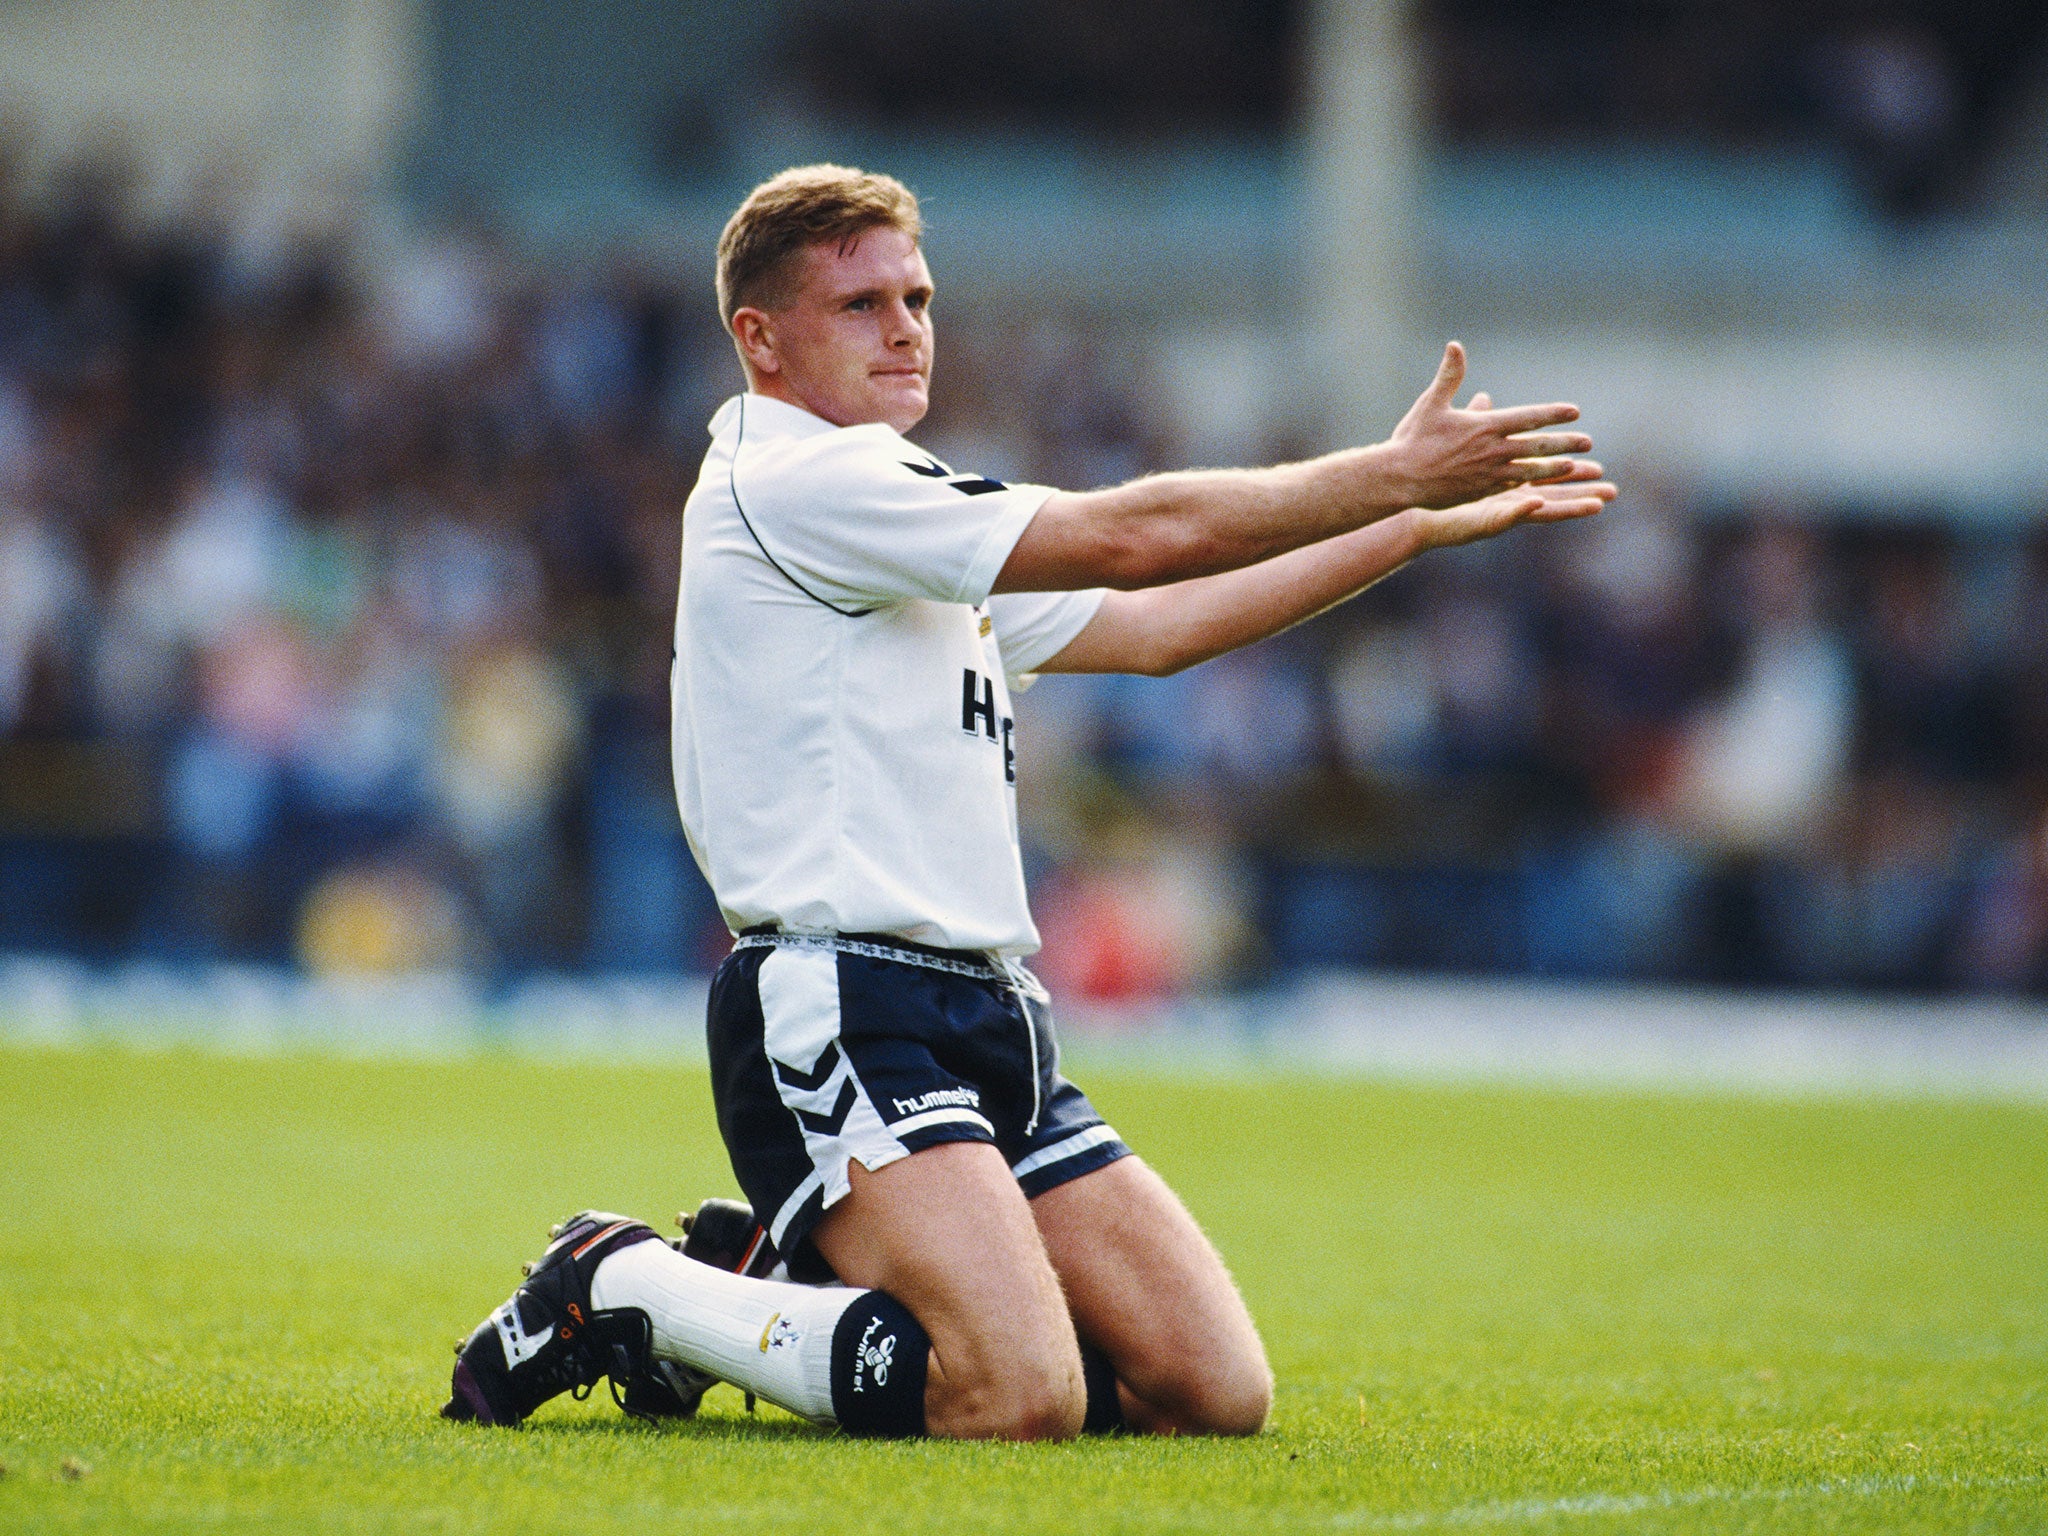 Paul Gascoigne pictured playing for Tottenham in 1989 